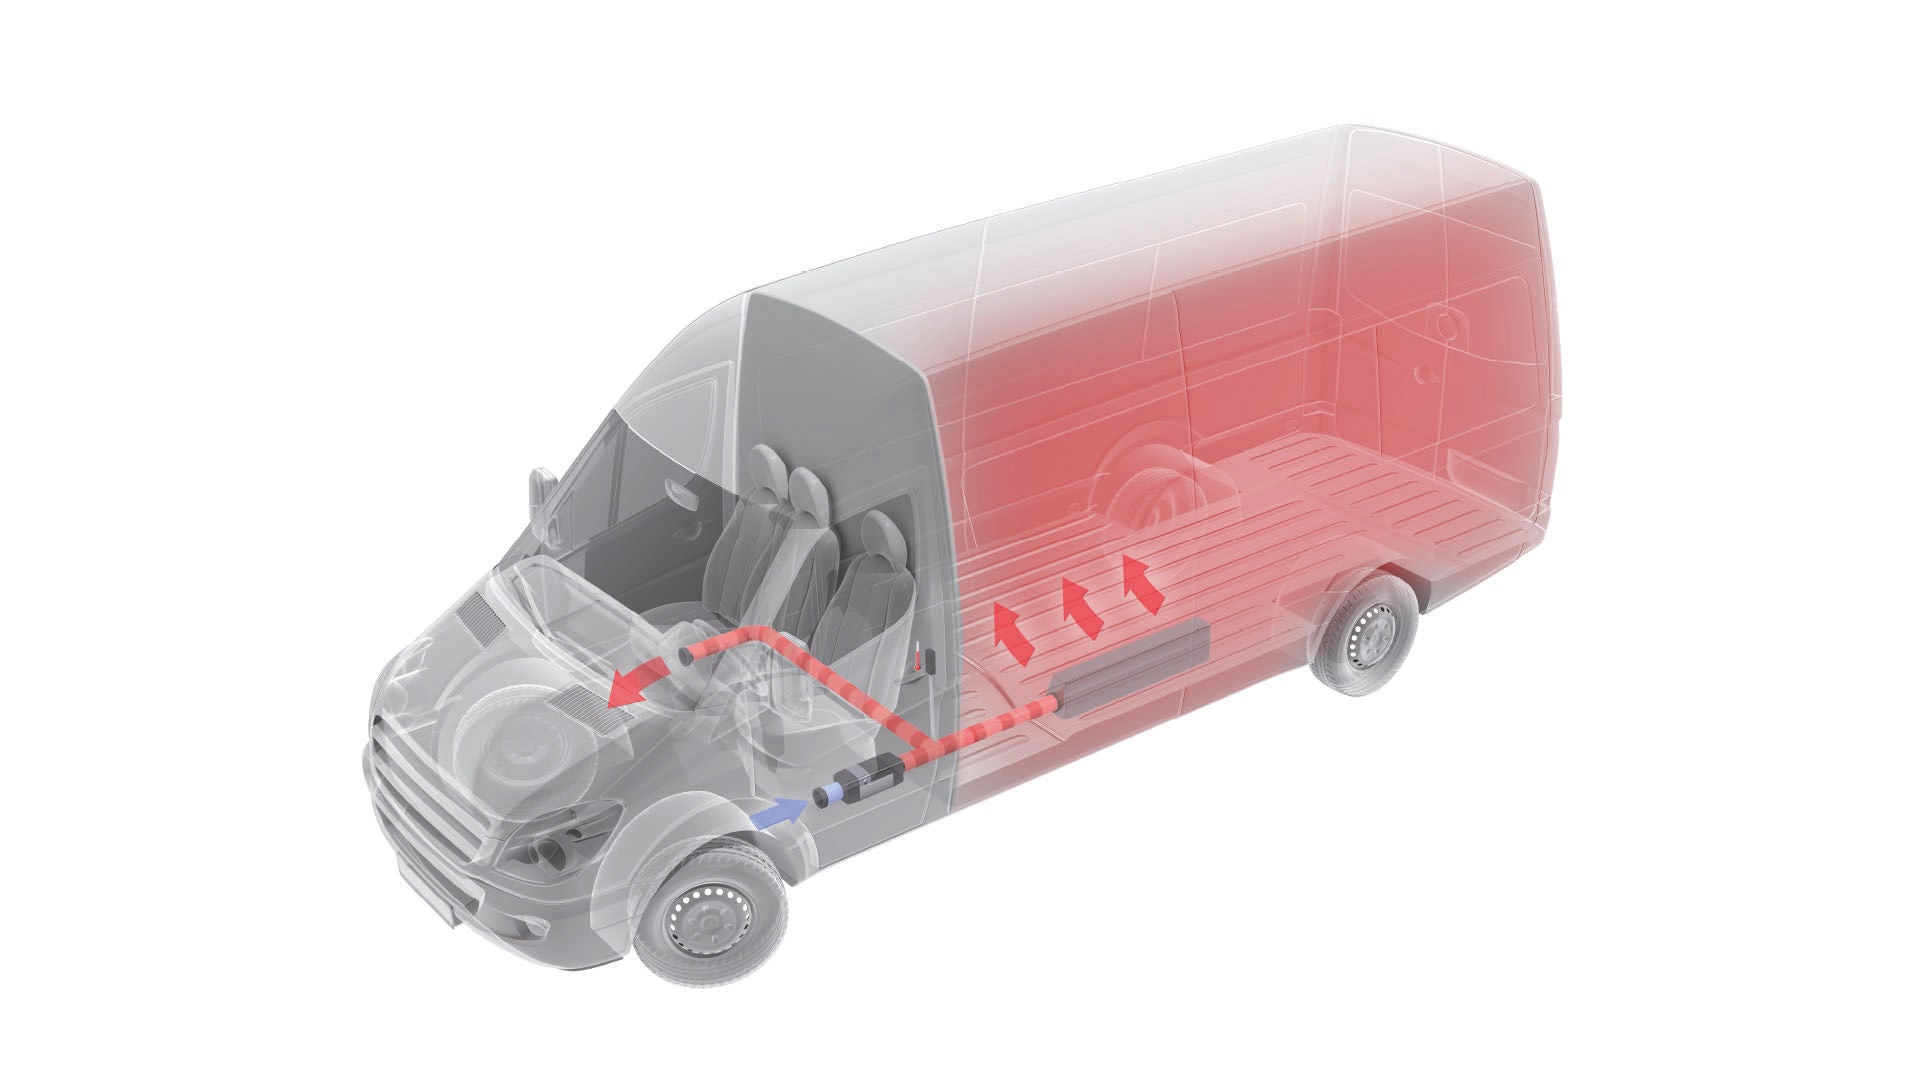 Illustration of a Webasto air heater in a transporter